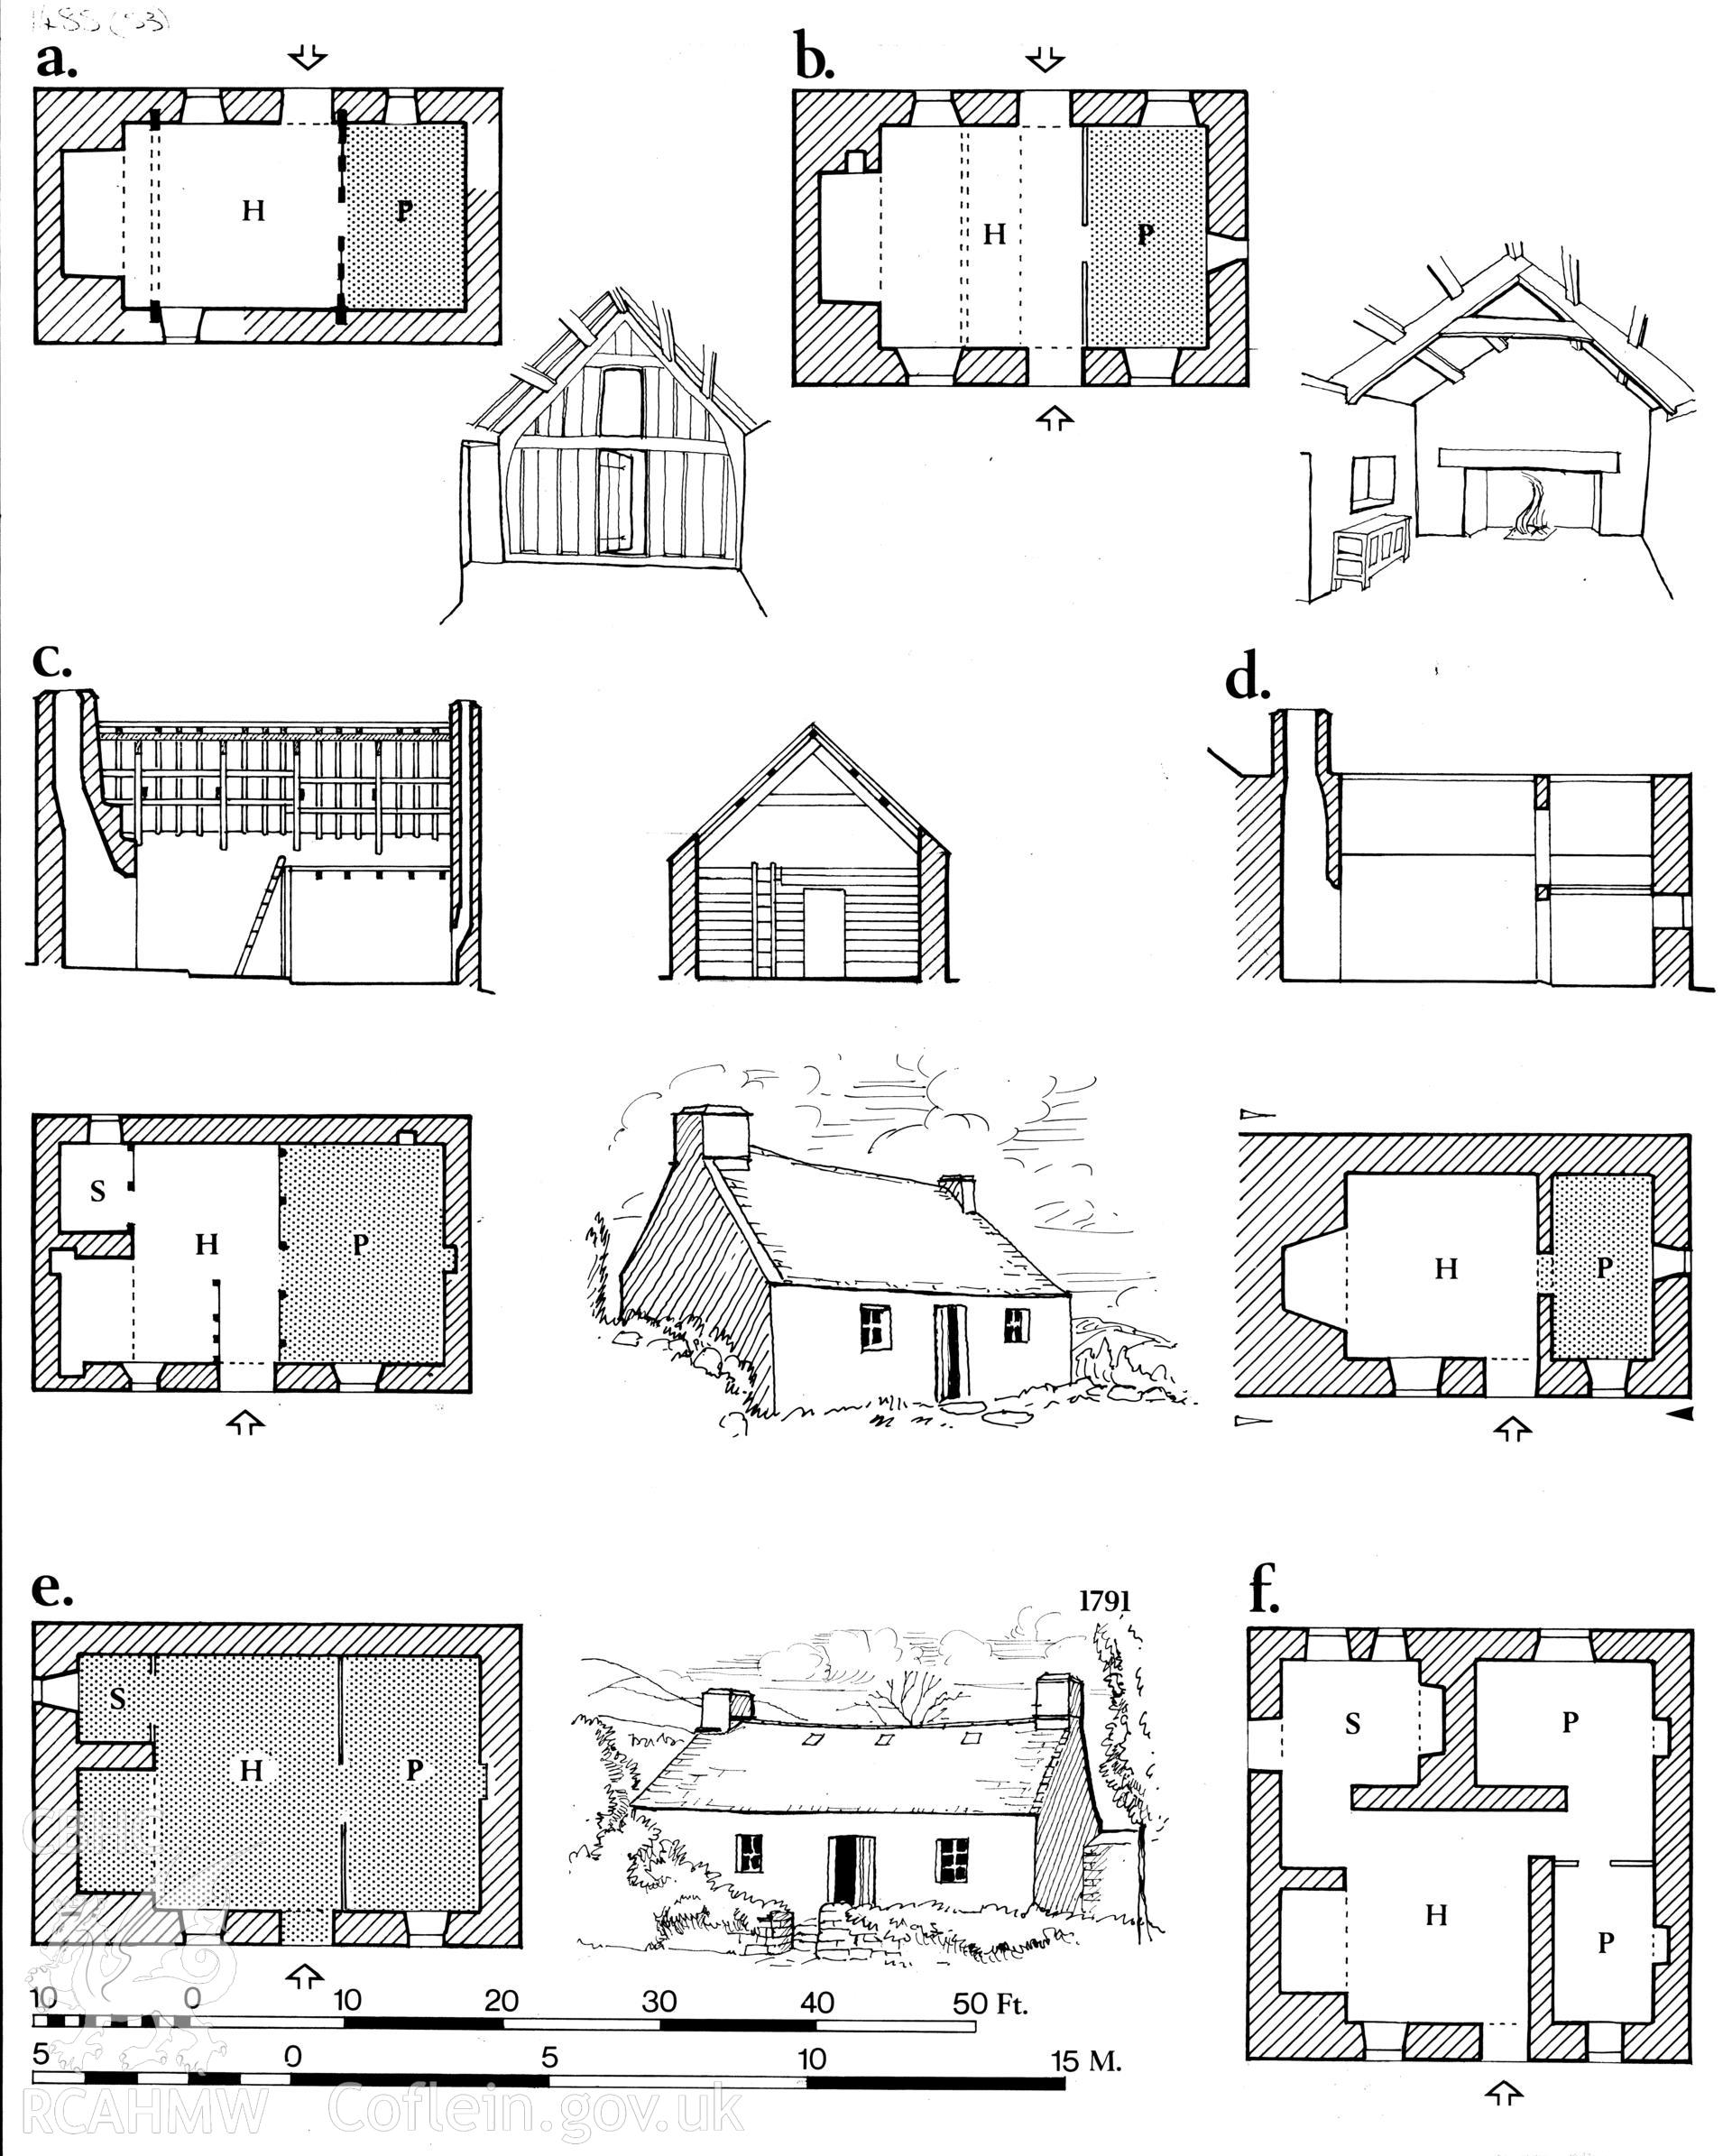 Multi site RCAHMW drawing, 6 sites, showing plan, section and elevation of six cottage sites, as published in Houses of the Welsh Countryside, fig 183.